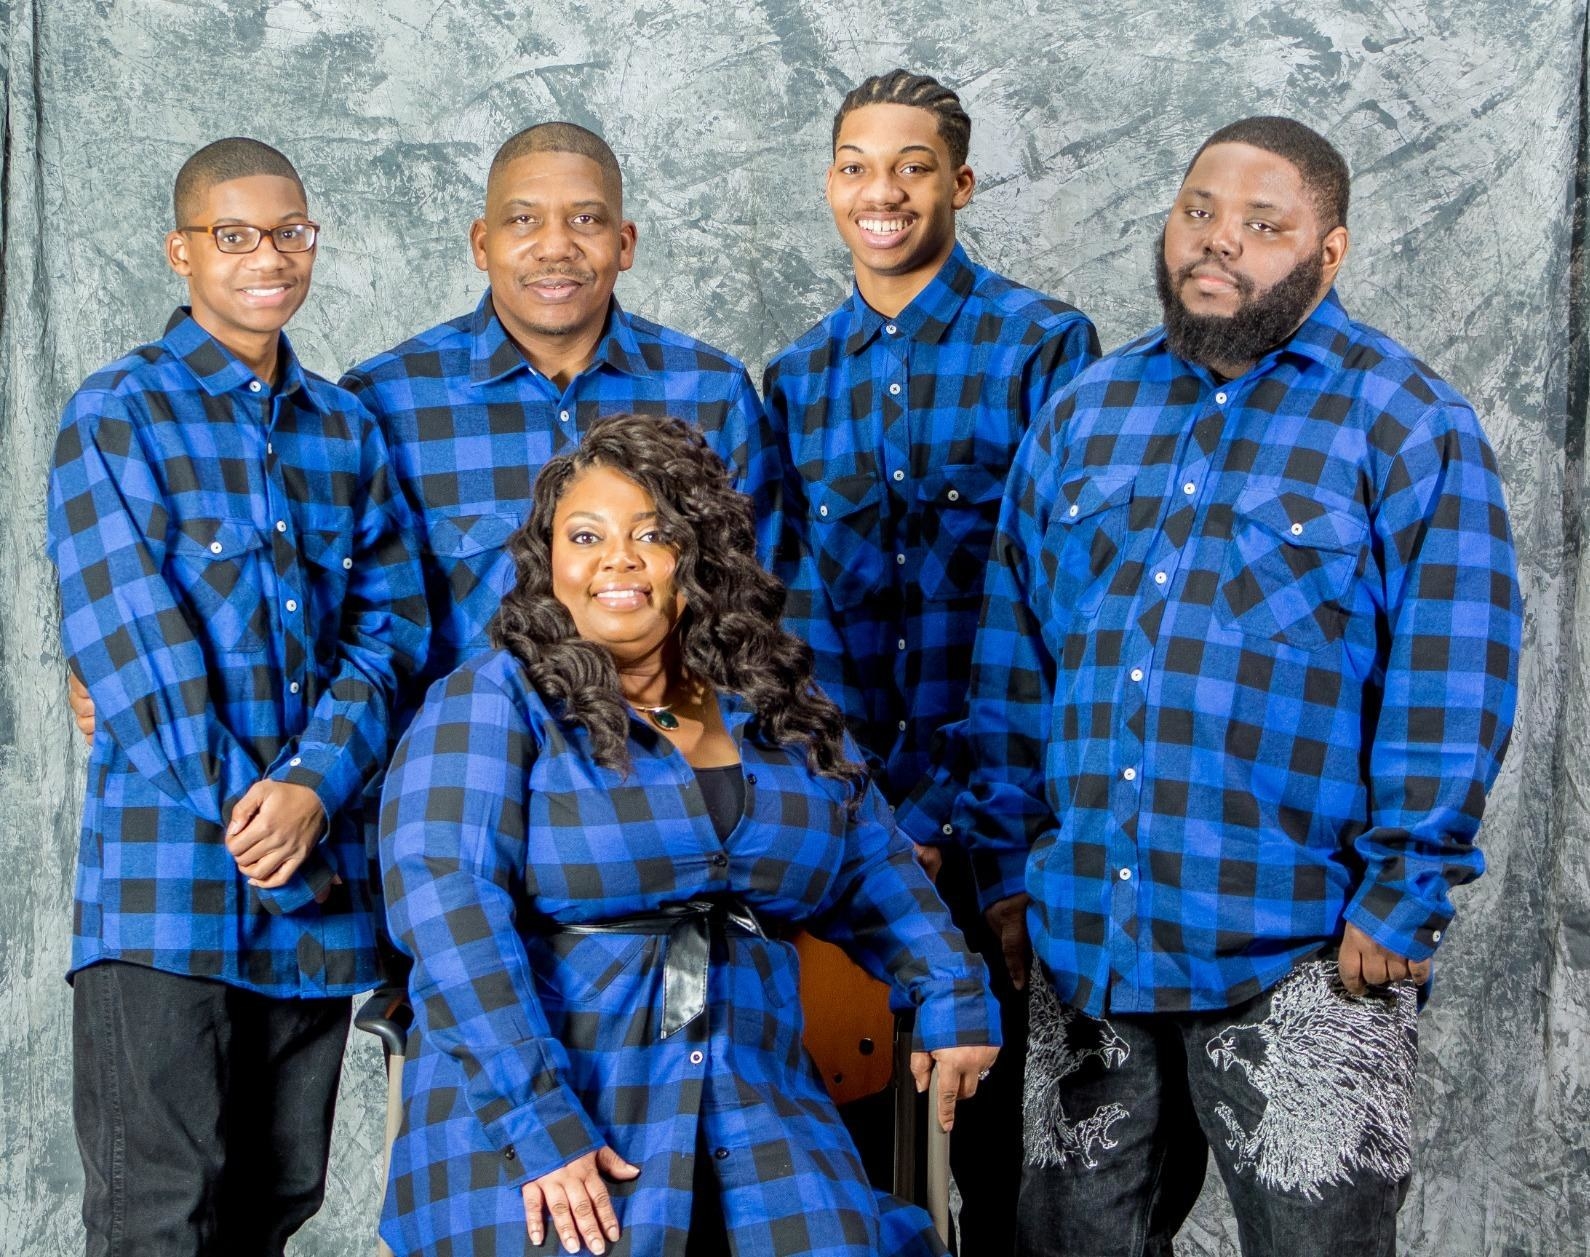 a reviewer group all wearing the plaid shirts in blue and black plaid